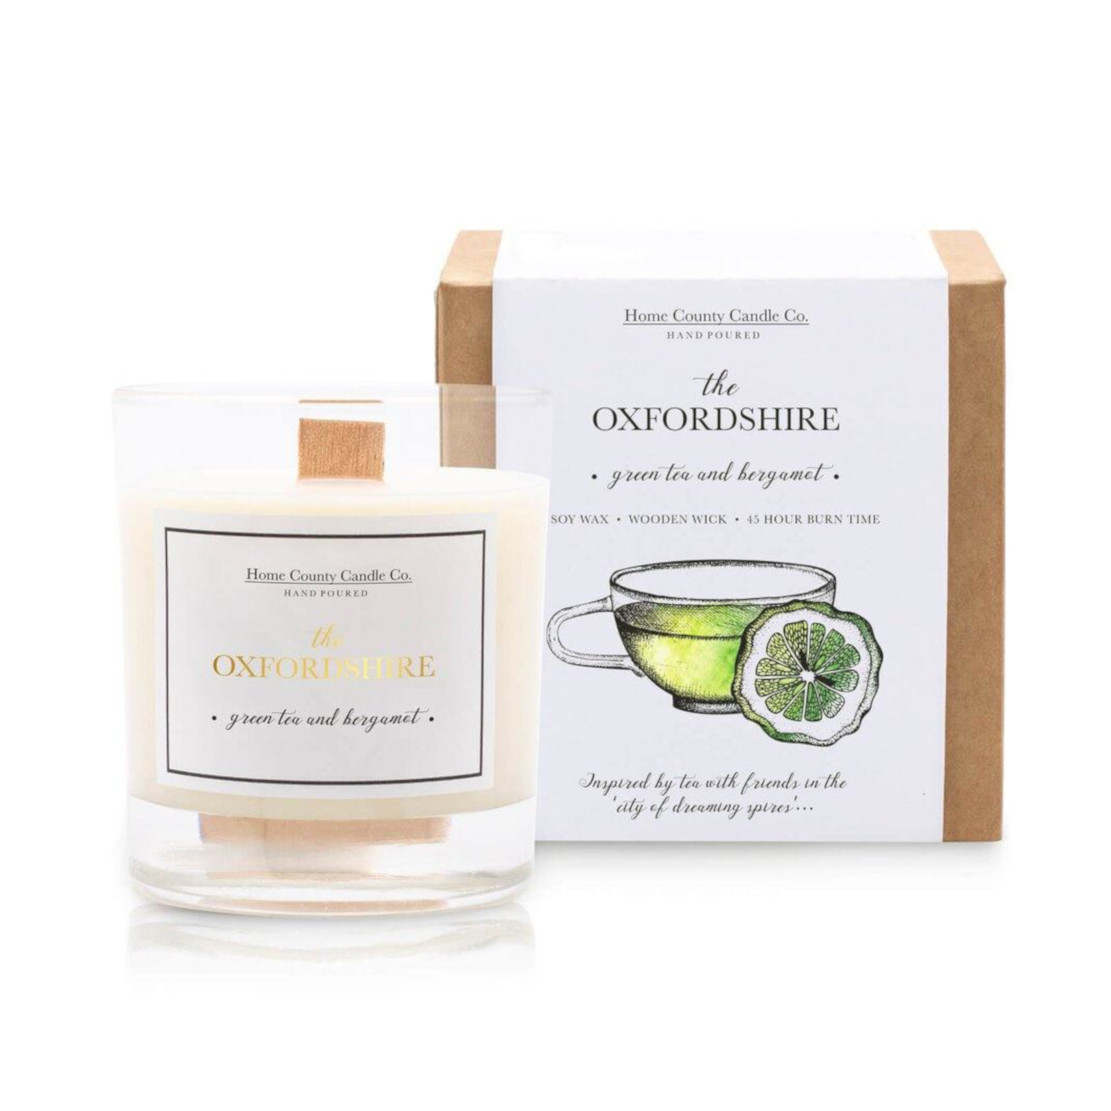 Home County Candle Oxfordshire 200g Soy Candle